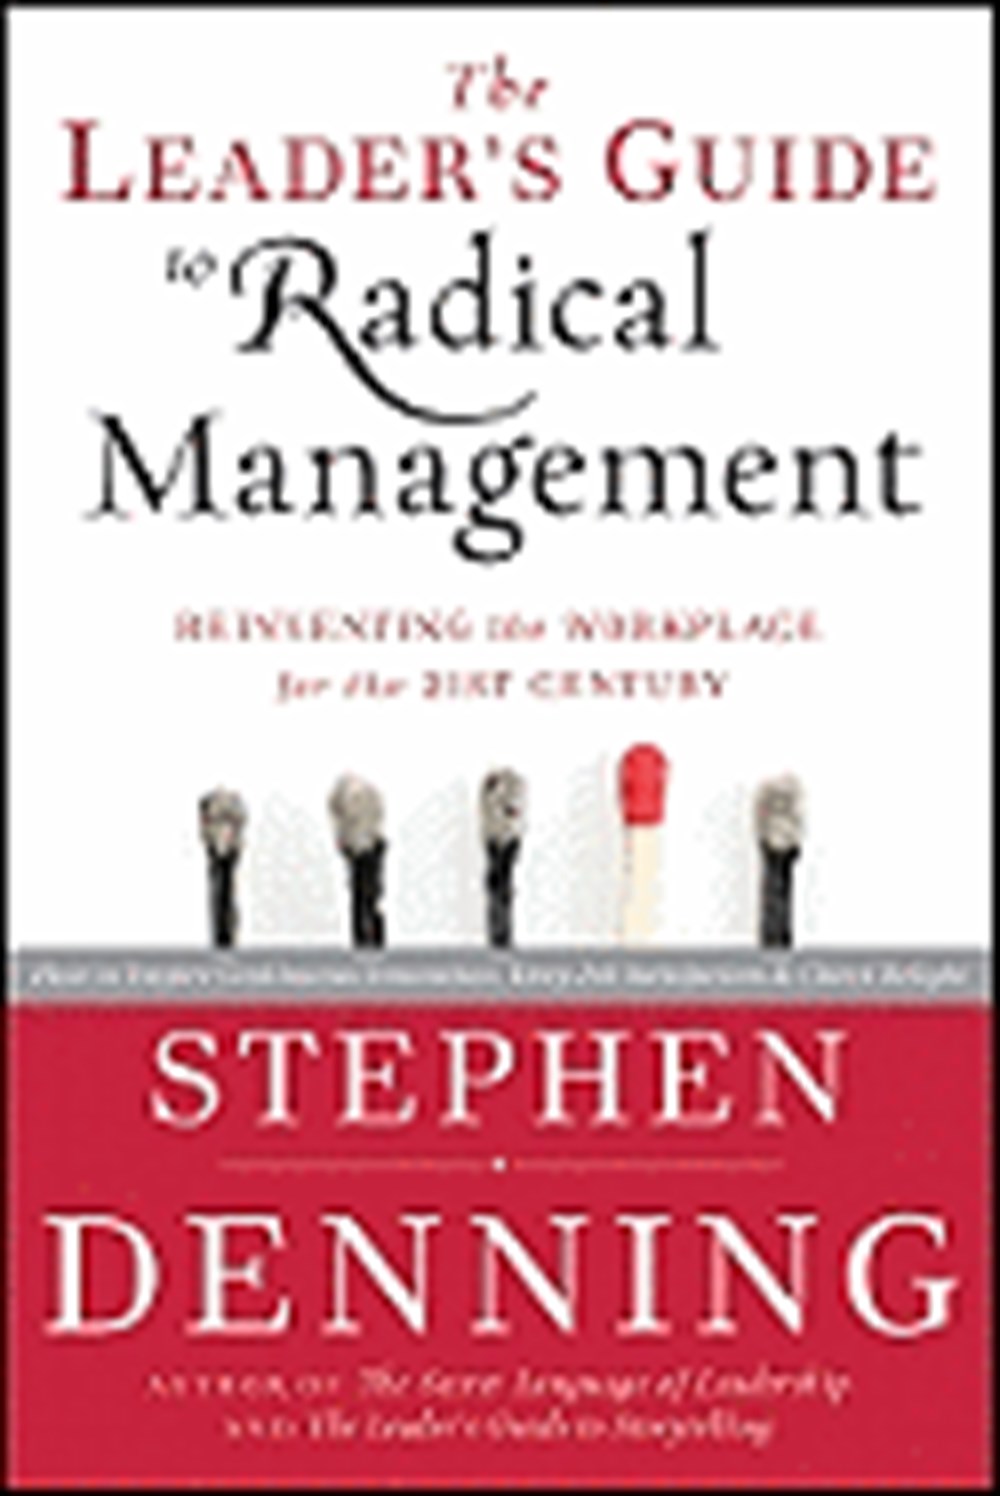 Leader's Guide to Radical Management: Reinventing the Workplace for the 21st Century